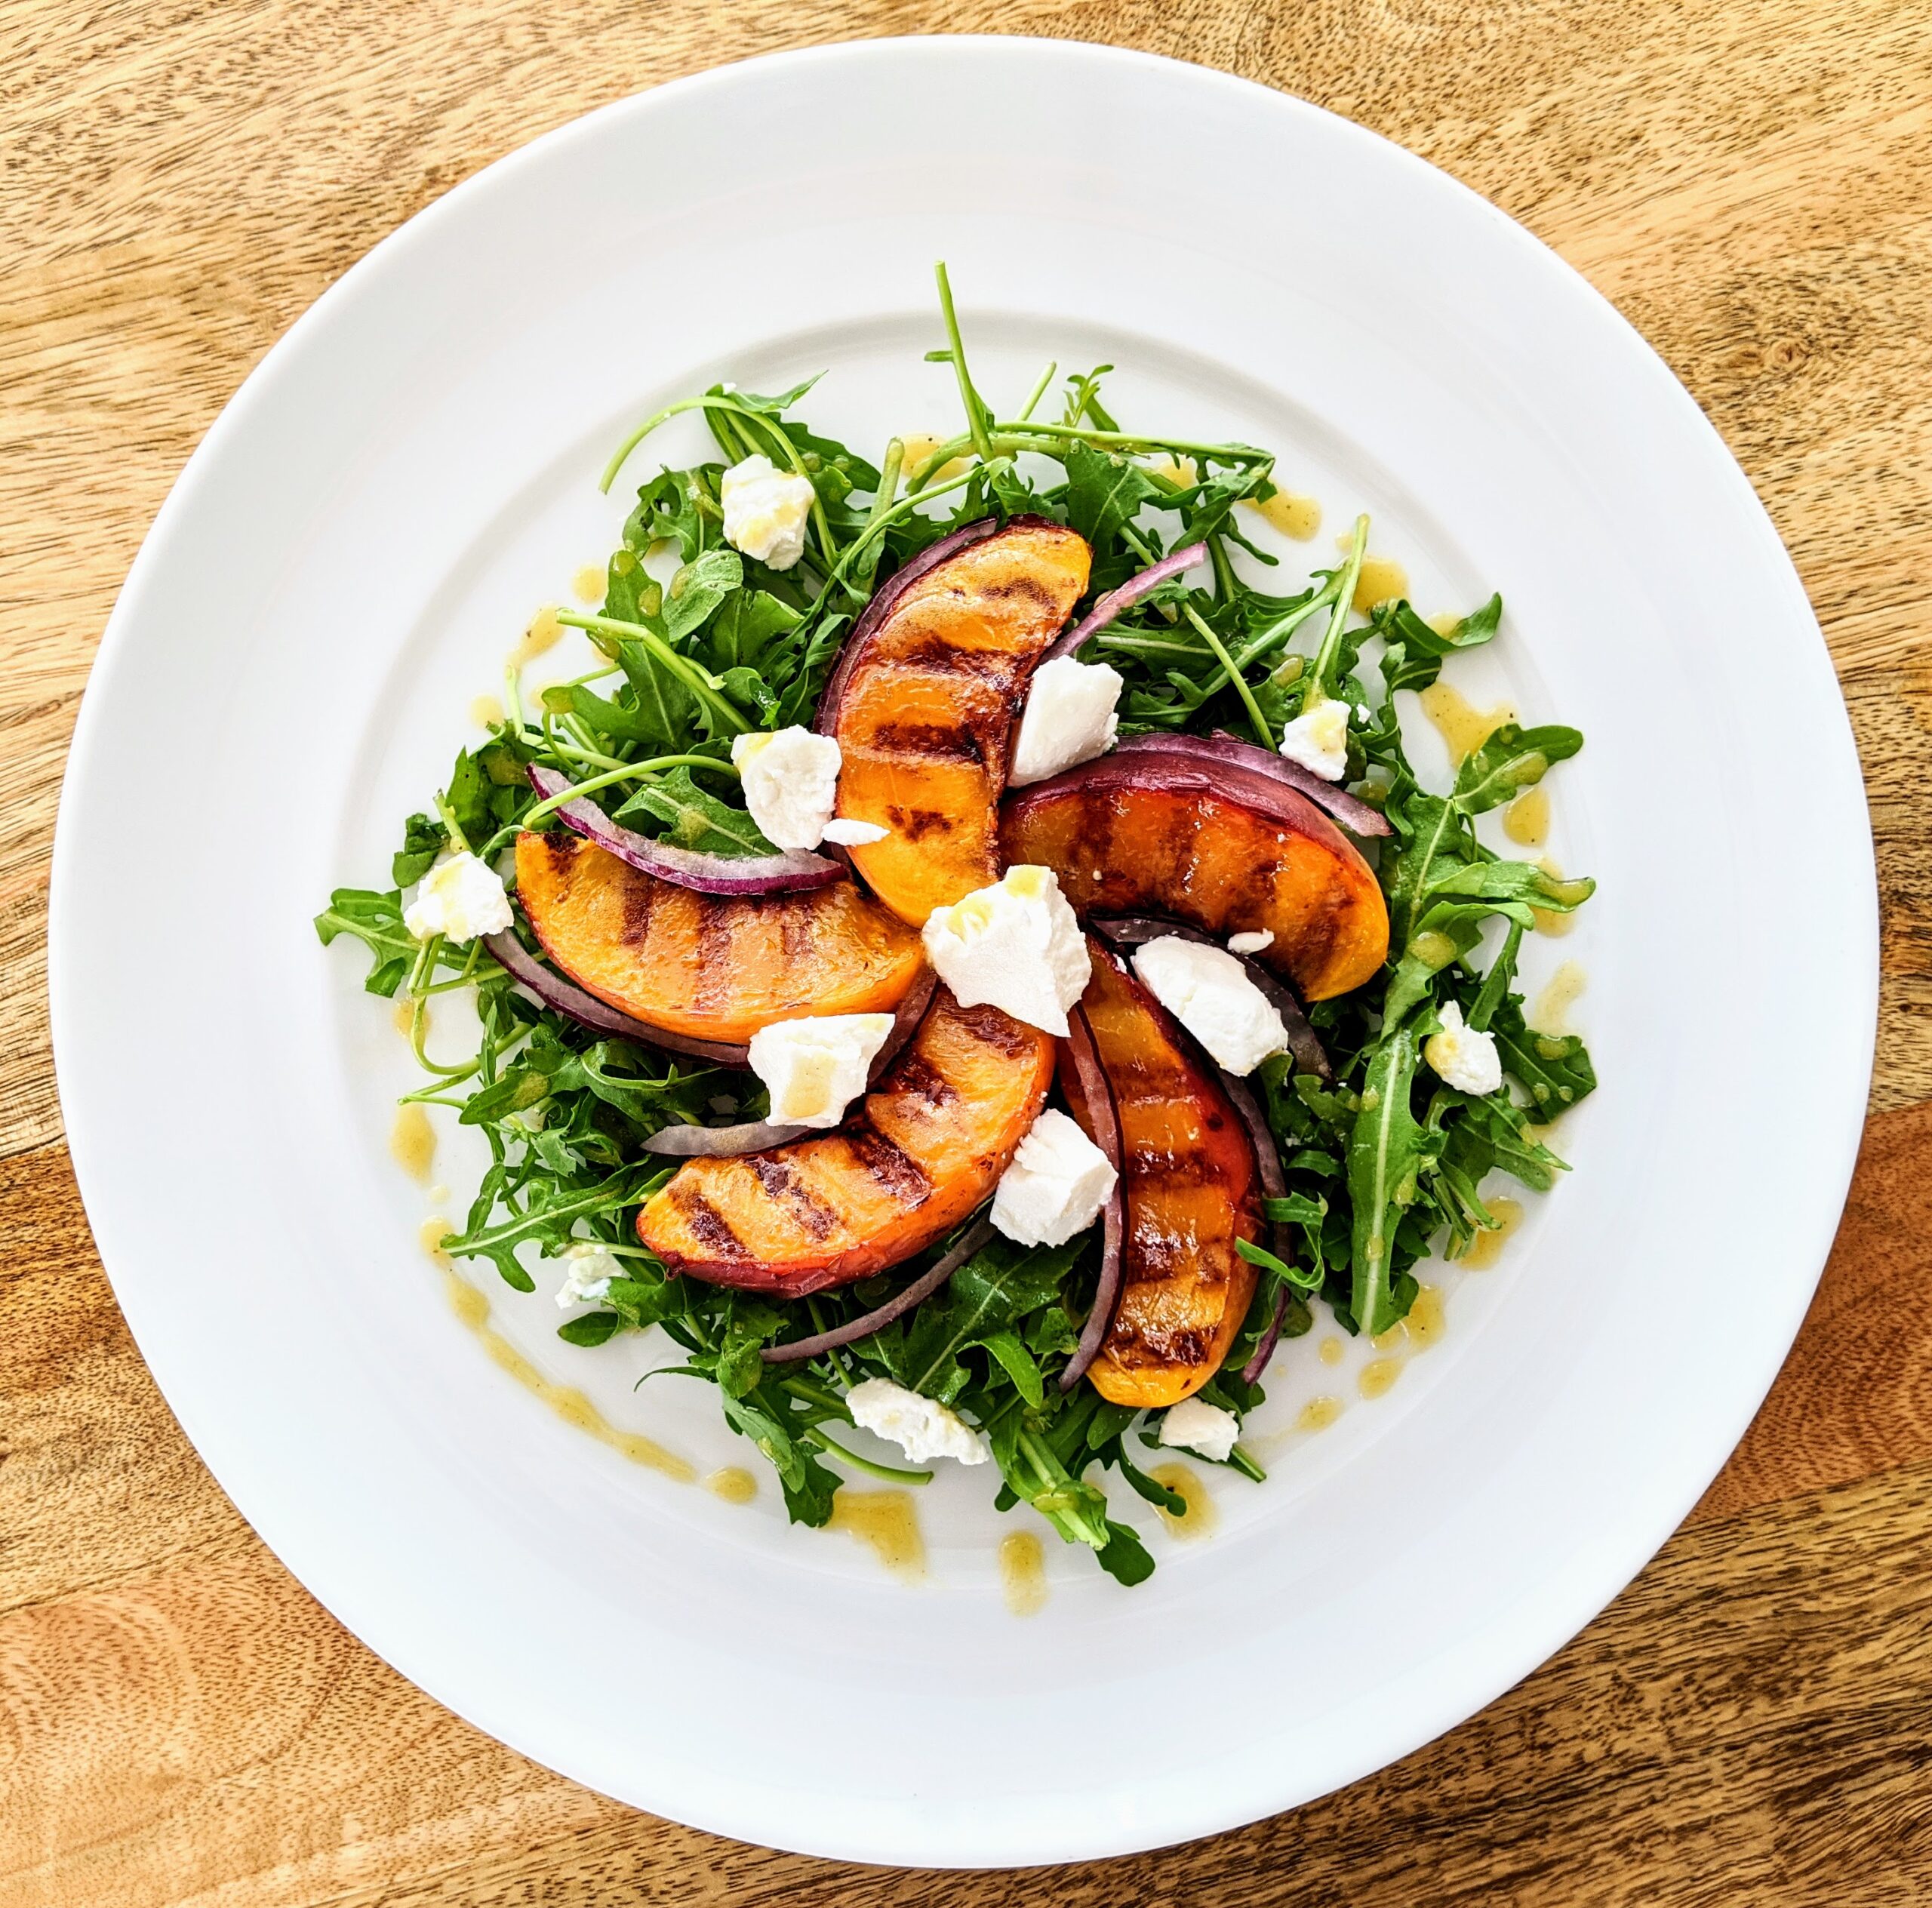 Champagne Vinaigrette drizzled on a grilled peach, arugula, and chèvre salad.